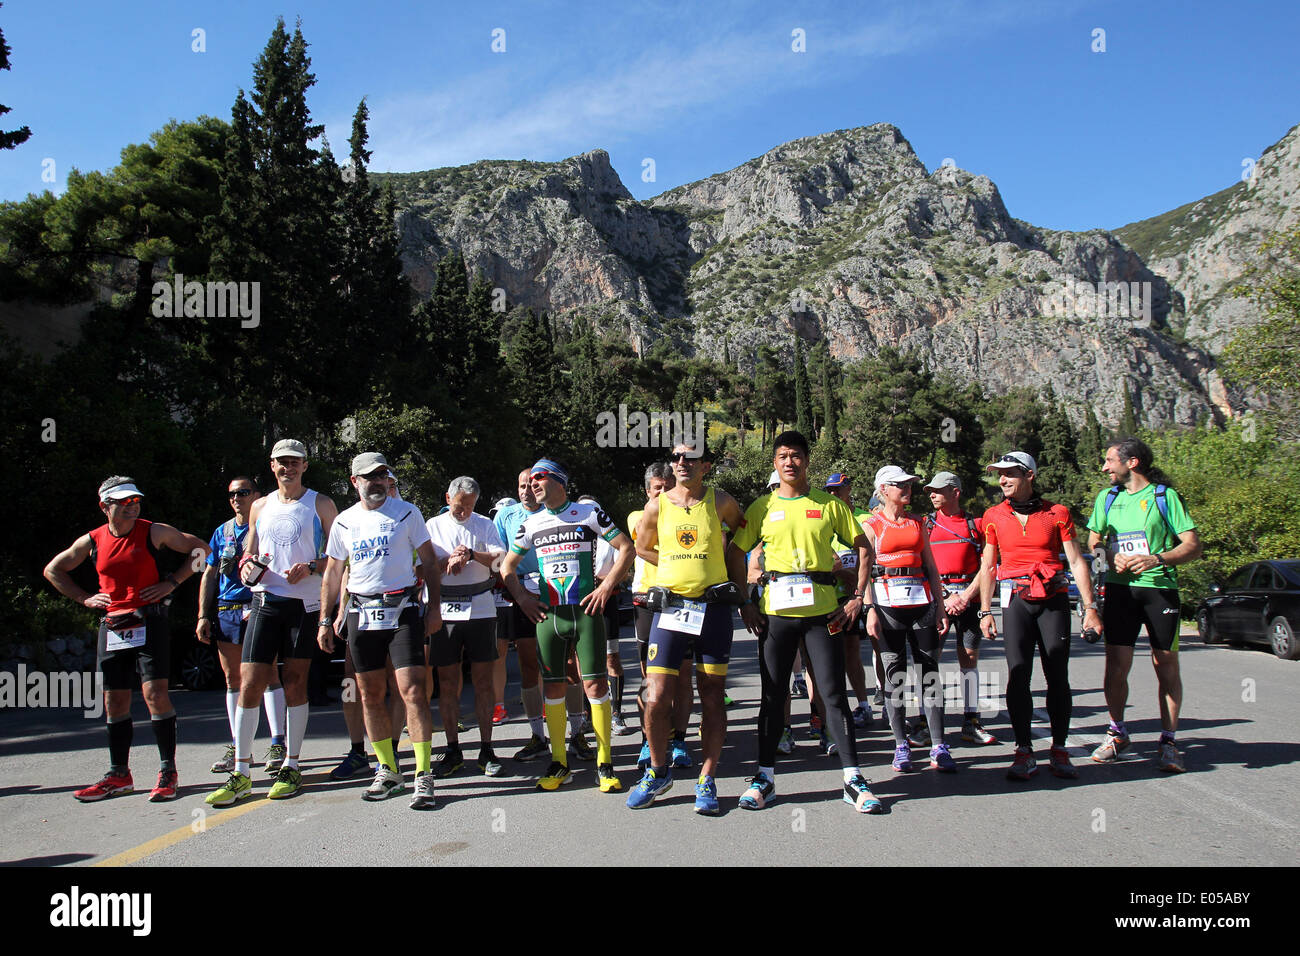 Athens. 2nd May, 2014. Participants in the 3rd Dolichos Ultra Marathon race pose for photograph at the starting point in front of the archaeological site of Delphi in central Greece on May 2, 2014. A total of 26 athletes, among them a Chinese, aim to run nonstop to Sunday afternoon the 255 kilometers course to Olympia, the birthplace of the Olympic Games. © Marios Lolos/Xinhua/Alamy Live News Stock Photo